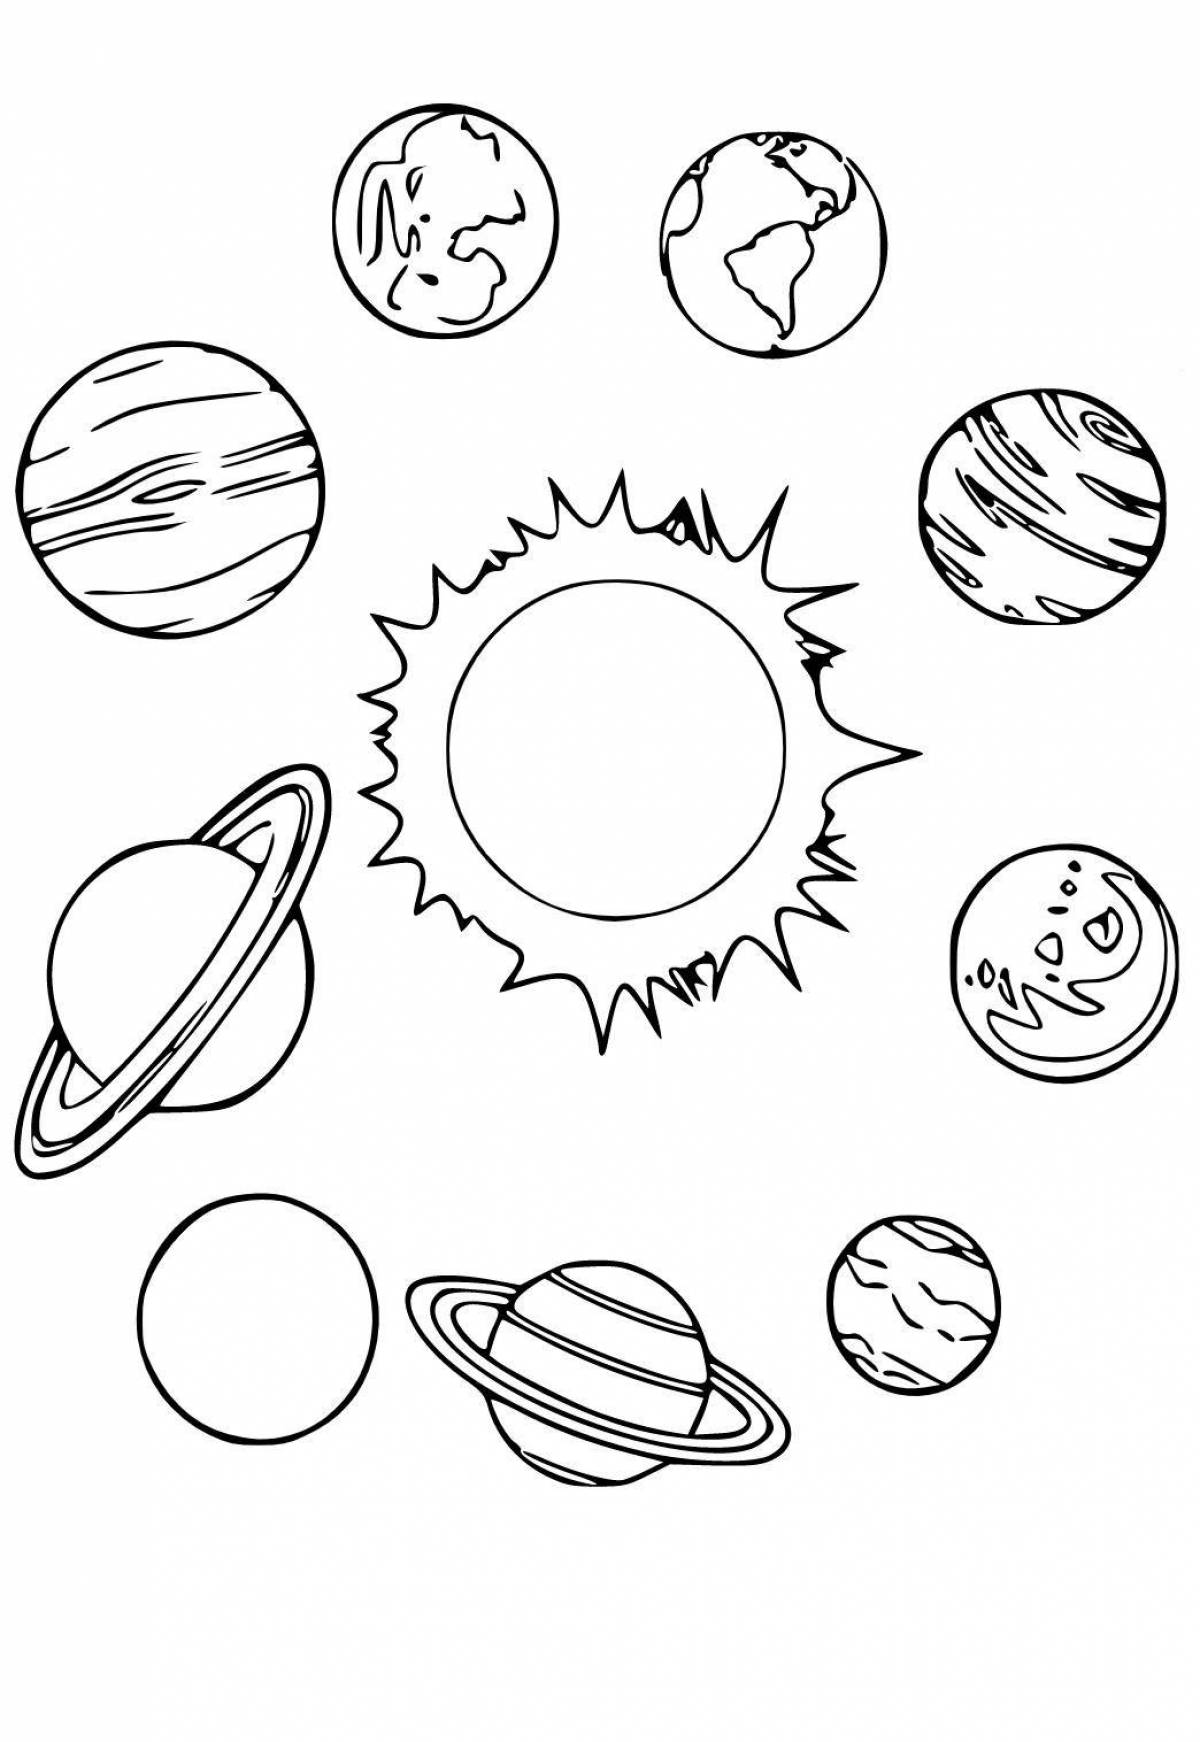 Vivacious coloring page planets of the solar system